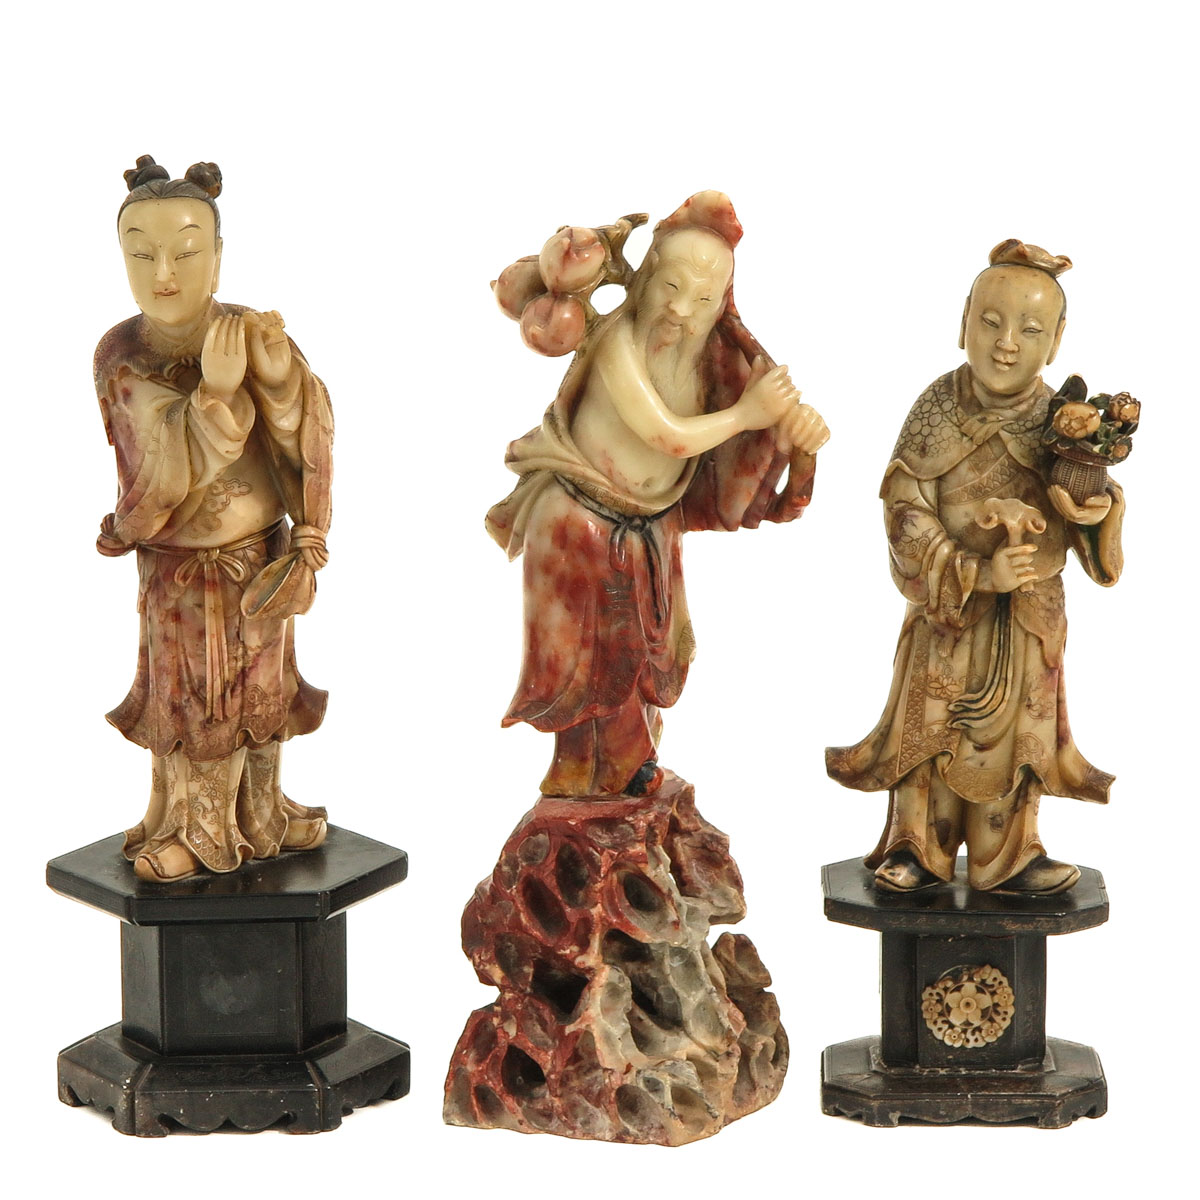 A Collection of 3 Soapstone Sculptures